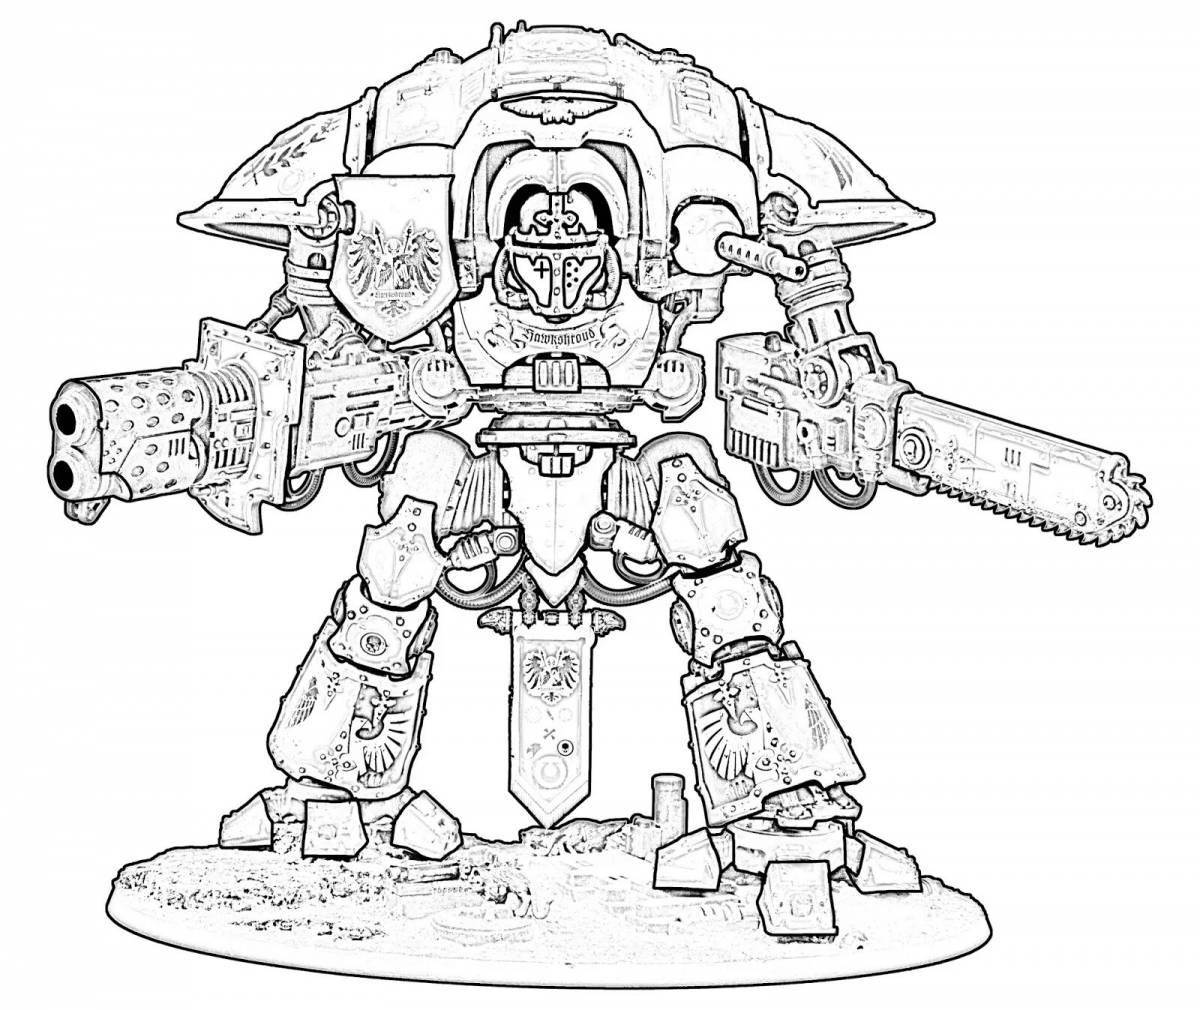 Colorfully illustrated warhammer coloring book